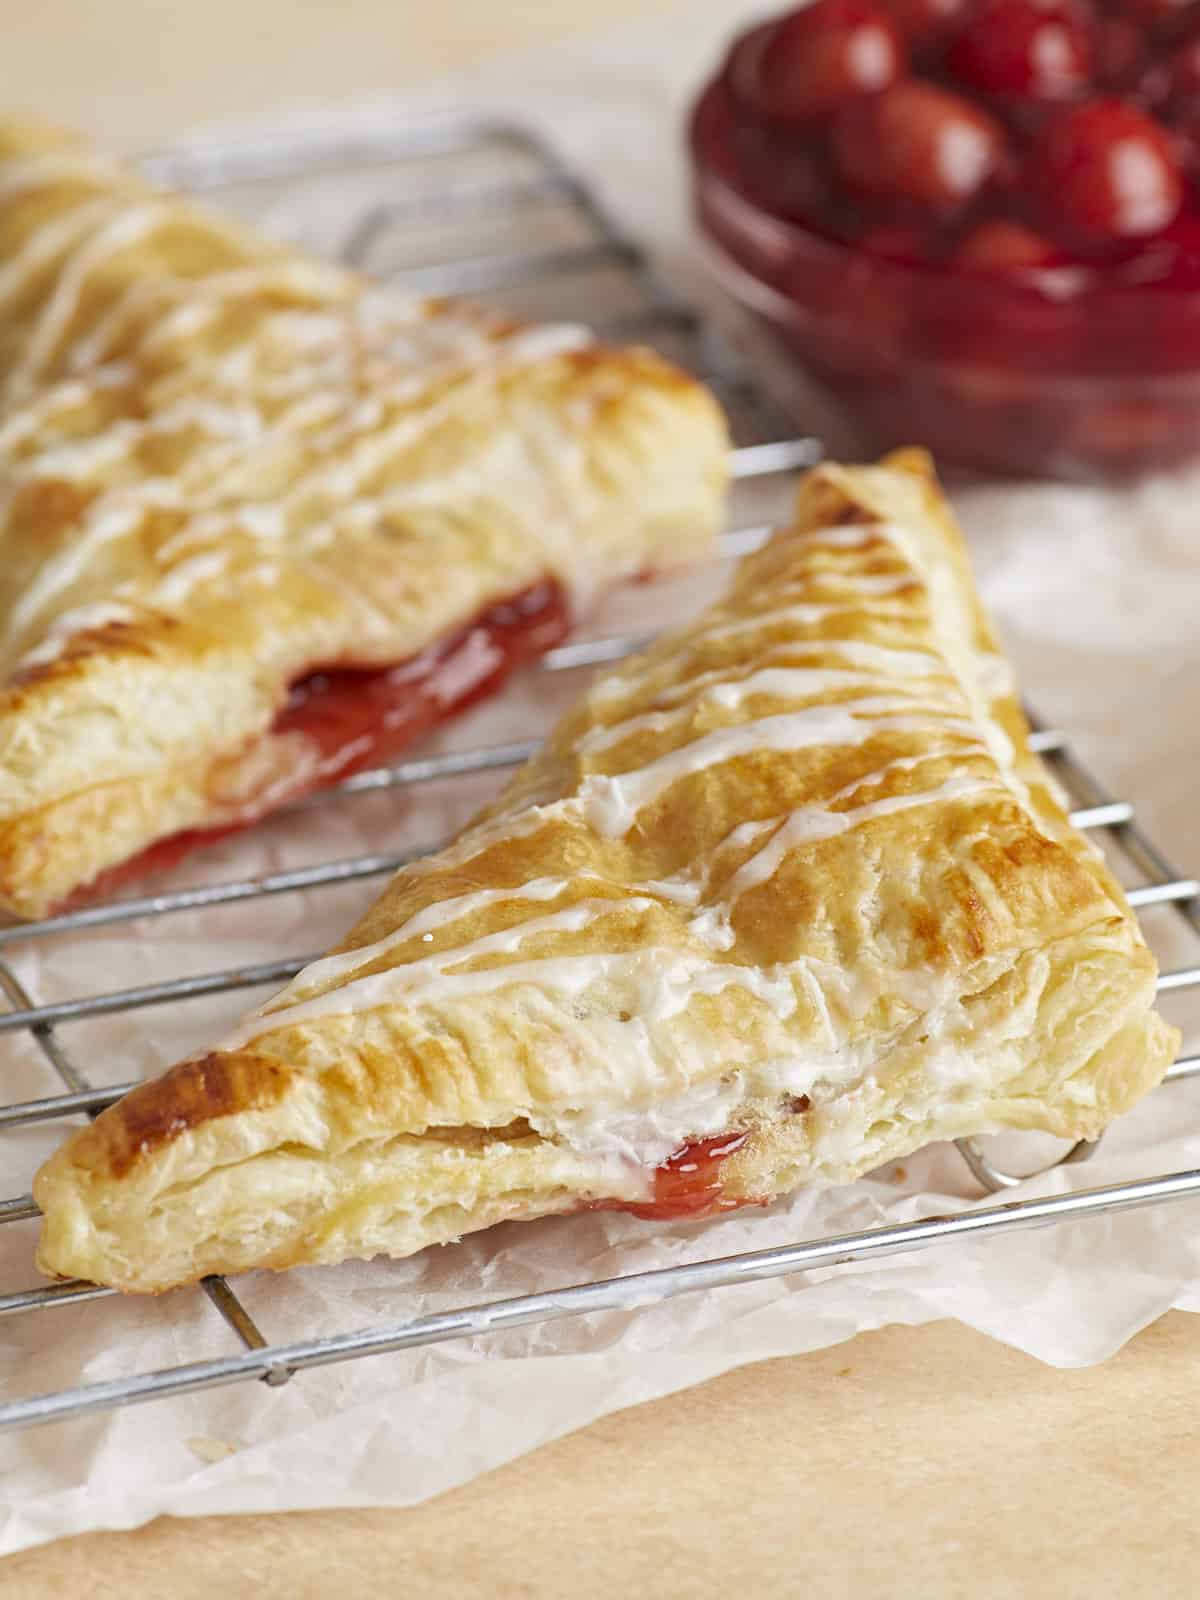 Side view of cherry turnovers on the wire cooling wrack.